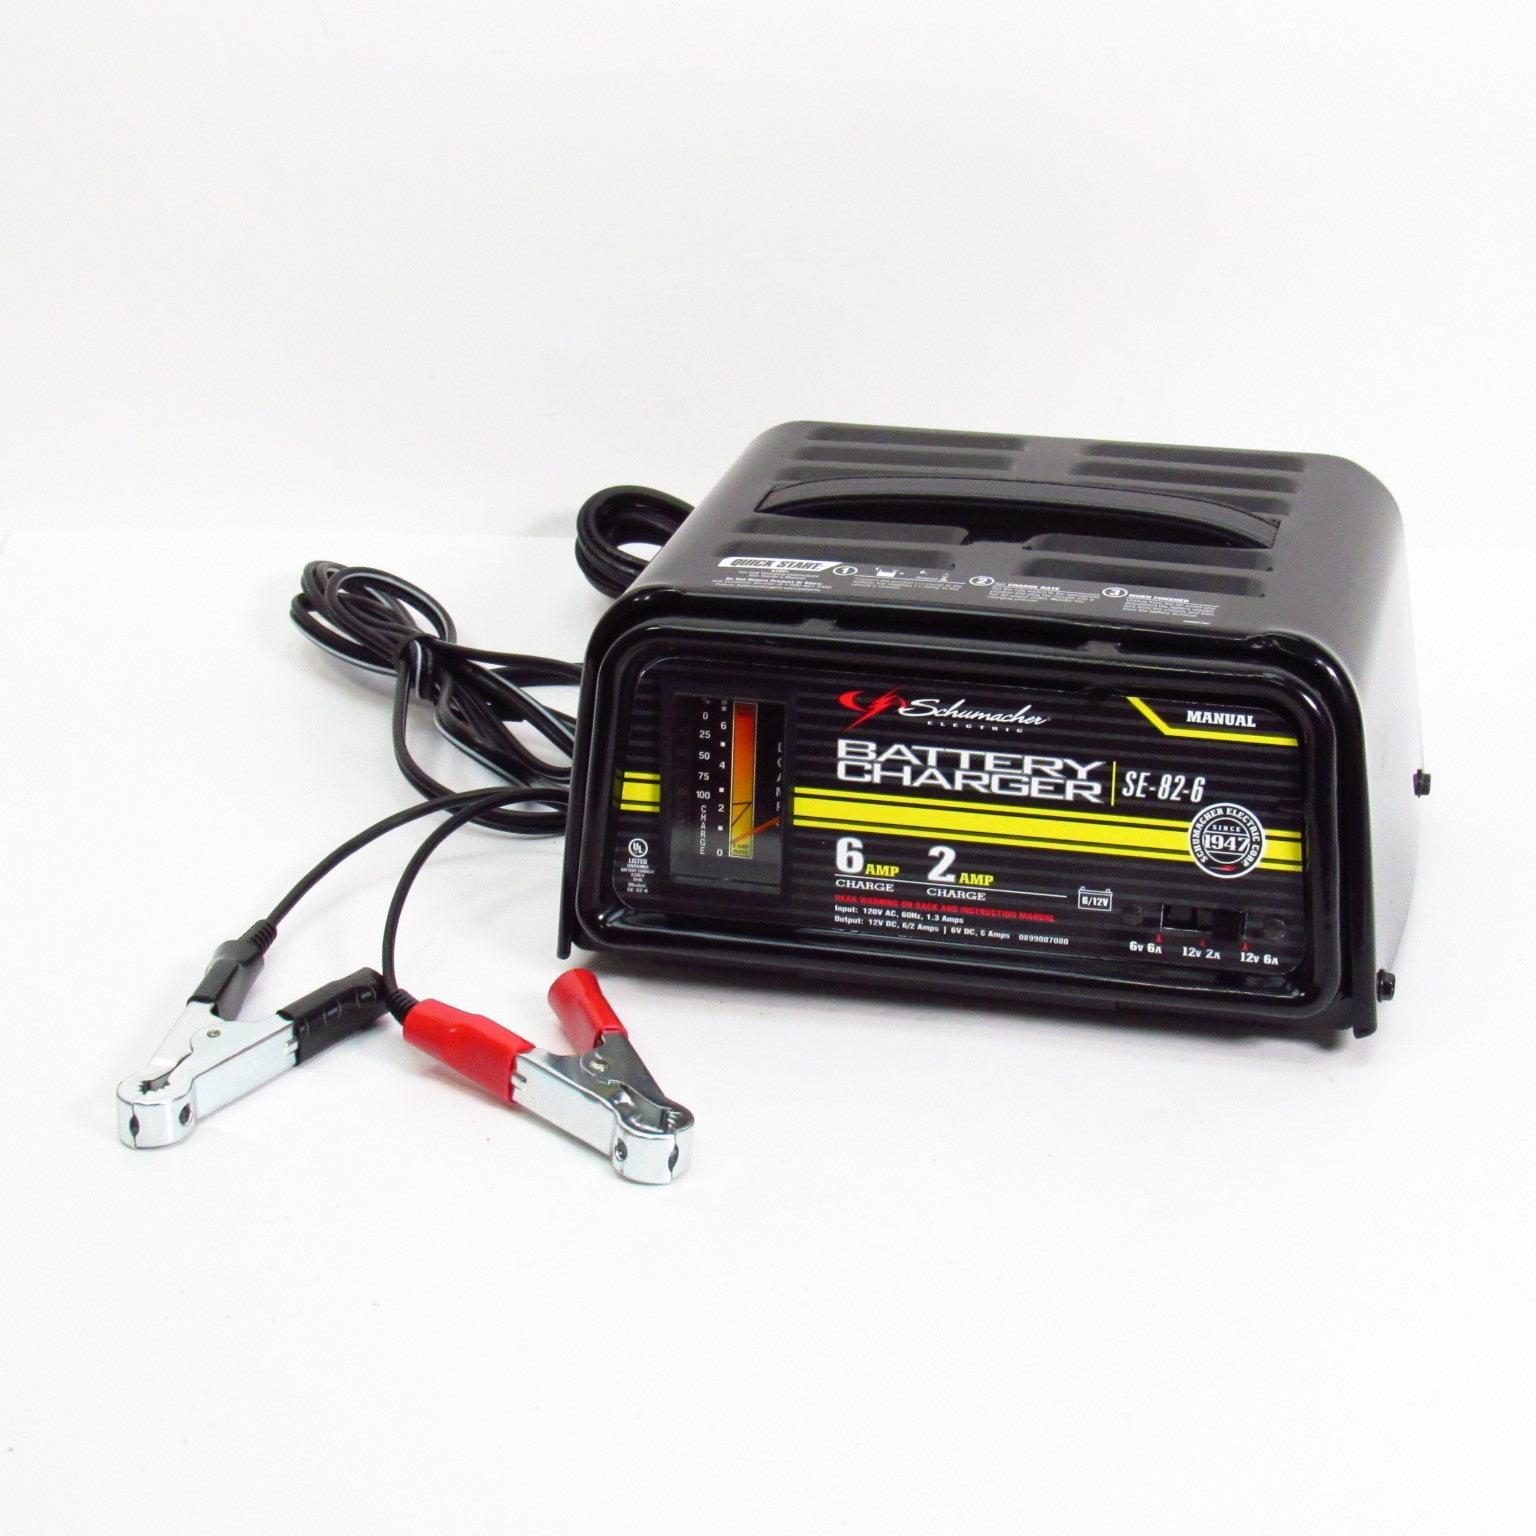 Schumacher Electric SE-82-6 Battery Charger - Local Pick-Up Only